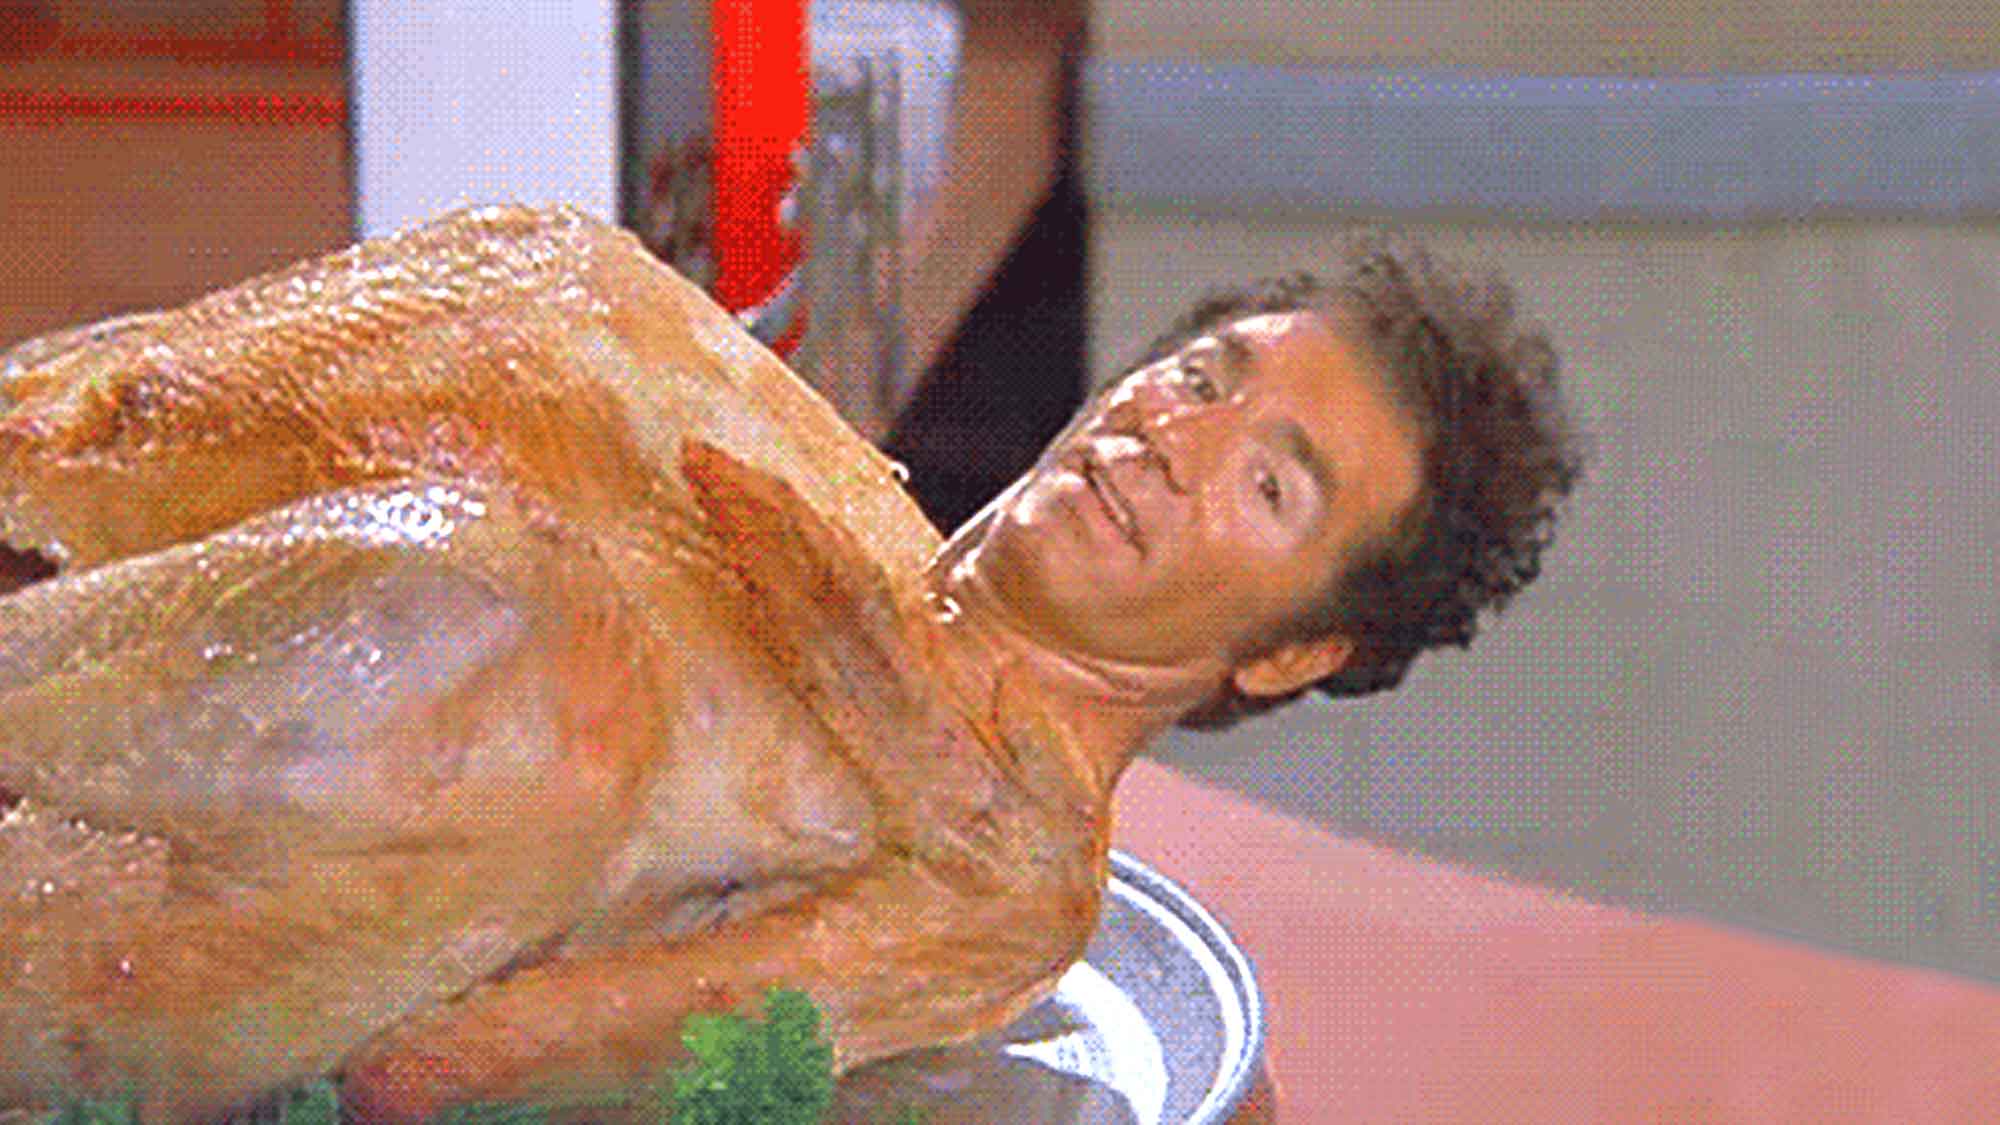 The Kramer Turkey Episode From Seinfeld Is Still Creepy After All These Years